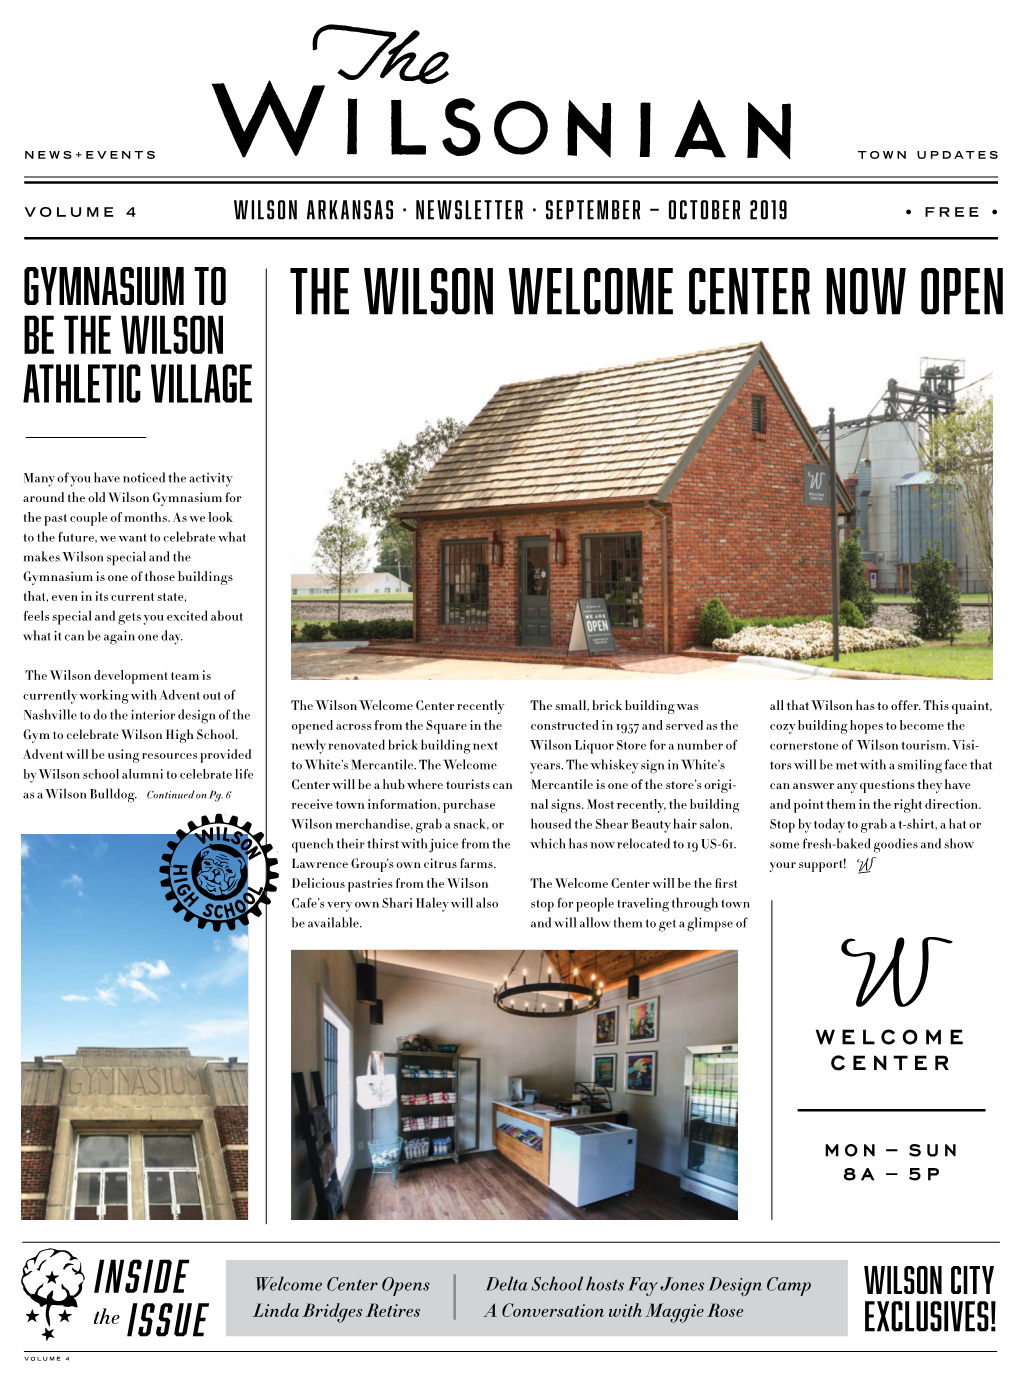 THE WILSON WELCOME CENTER NOW OPEN Be the Wilson Athletic Village